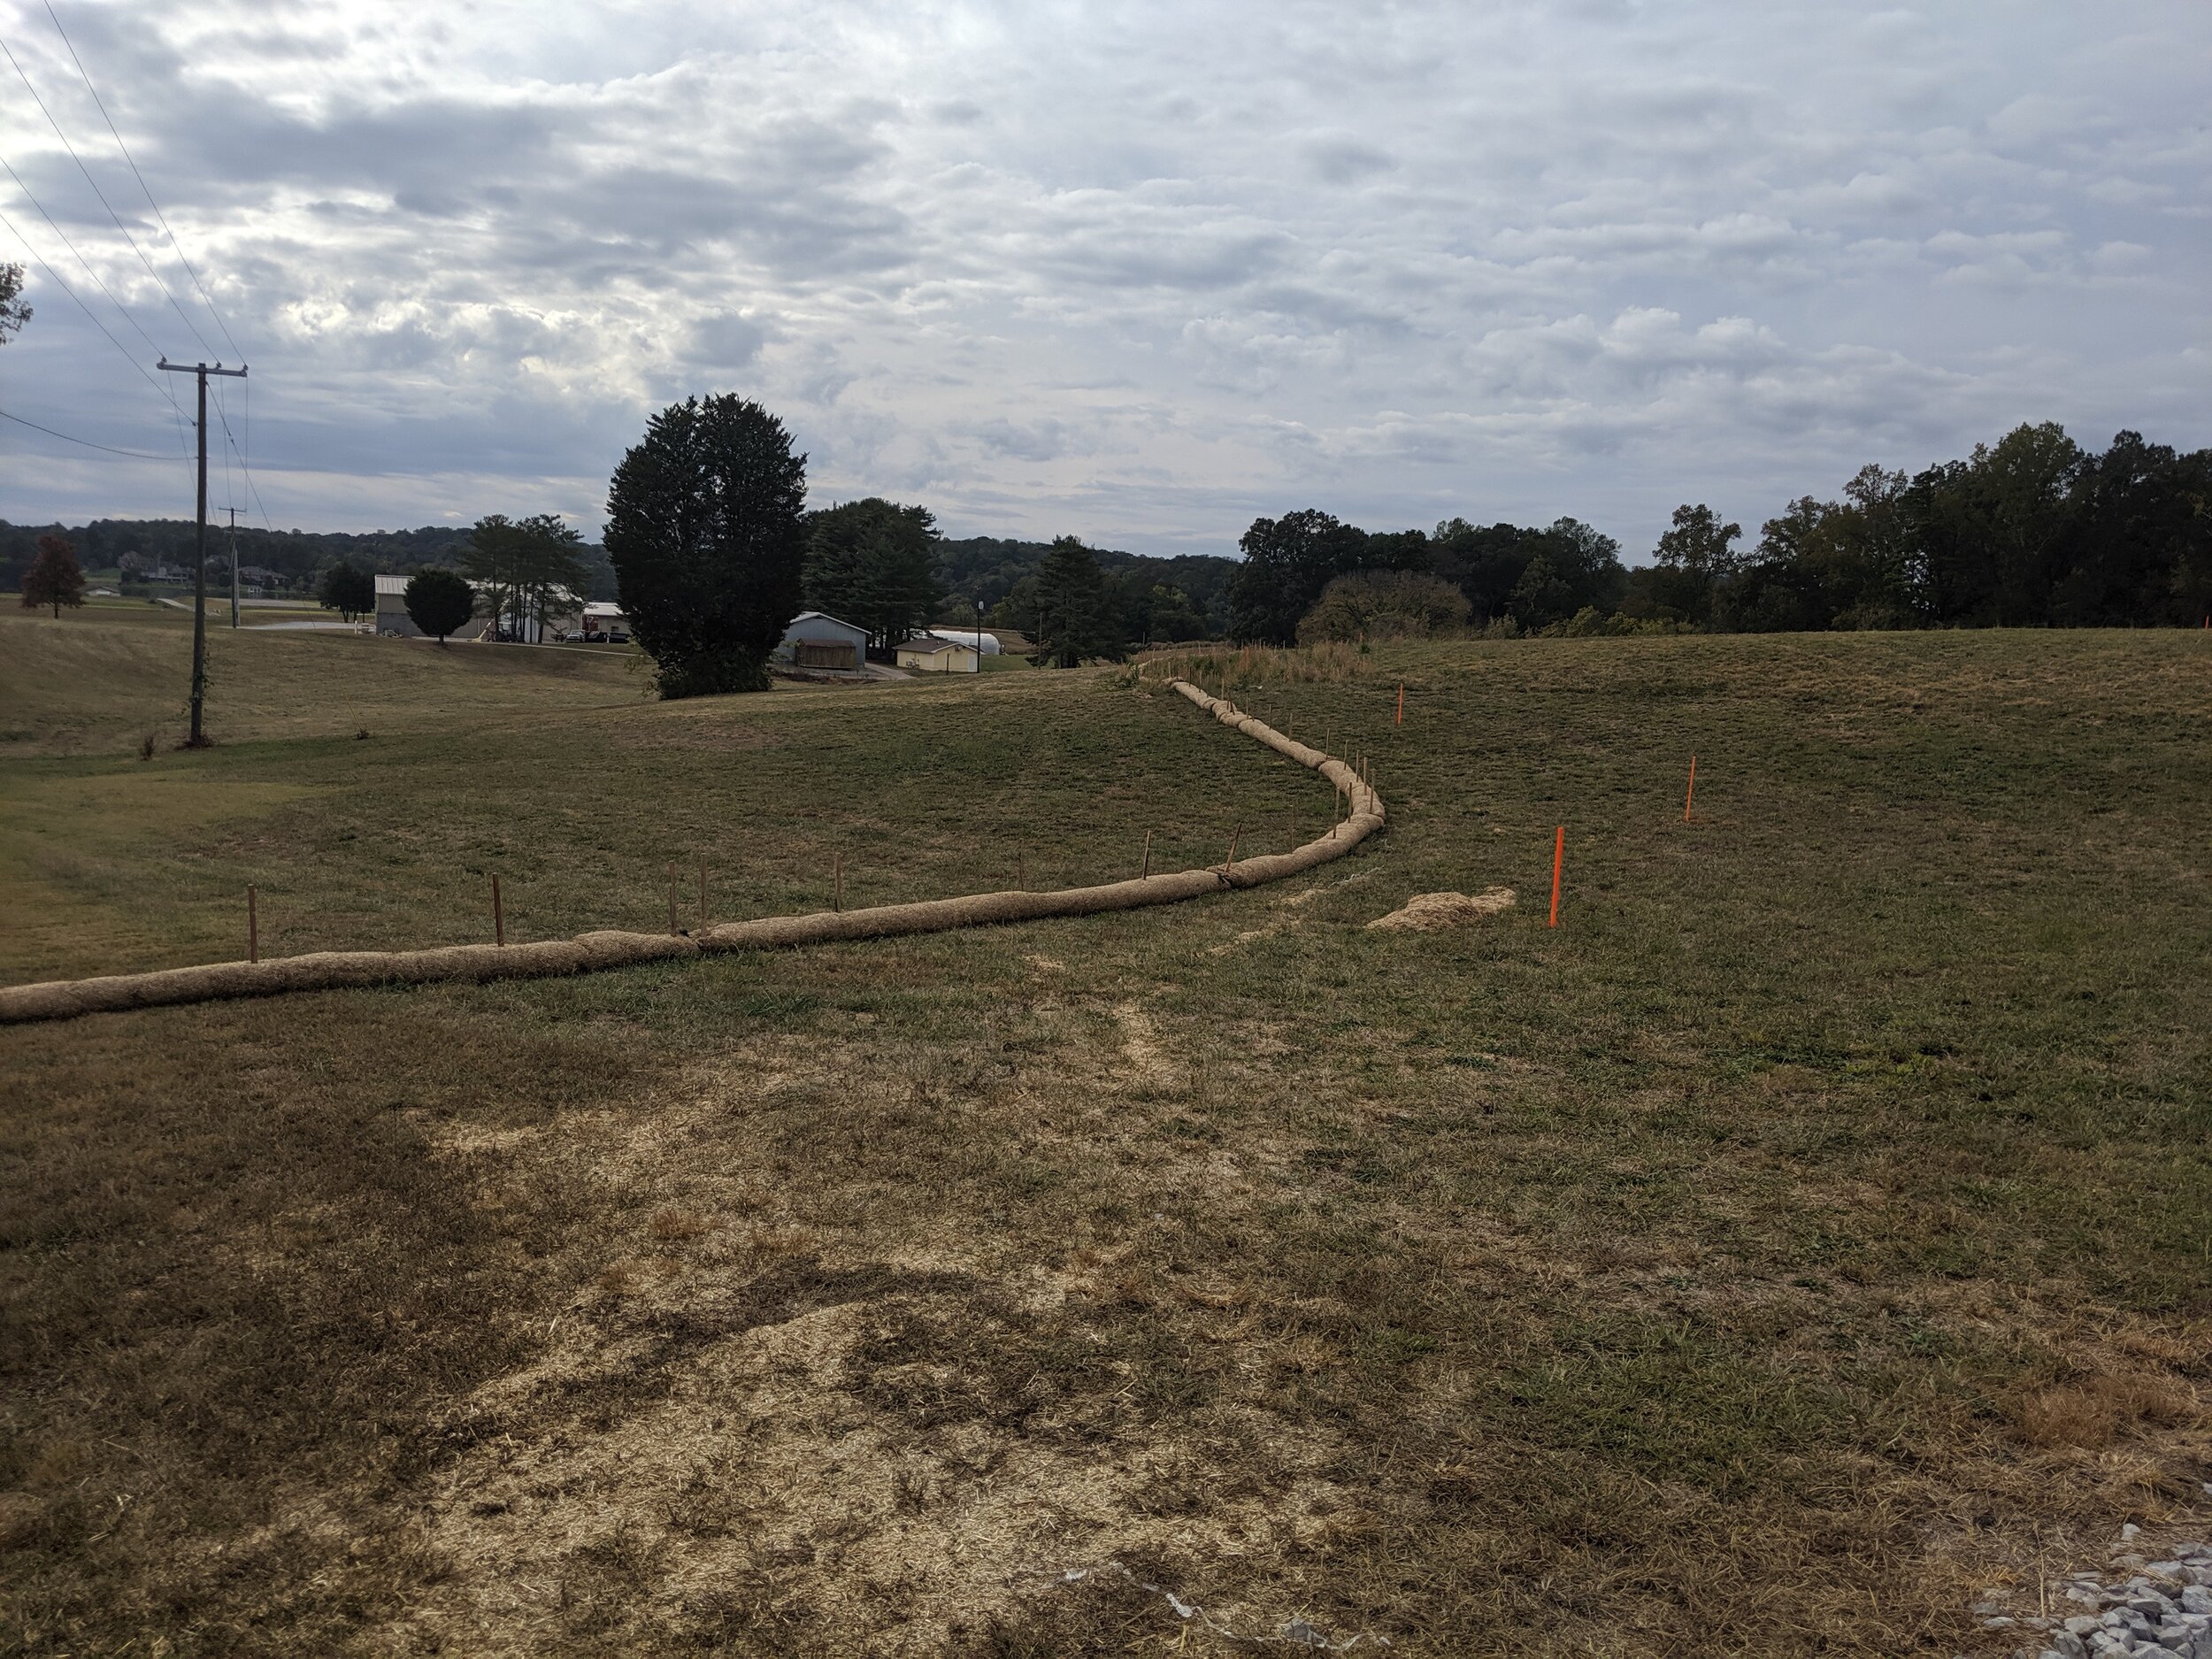 10-15-19 Erosion Control and Survey Staking